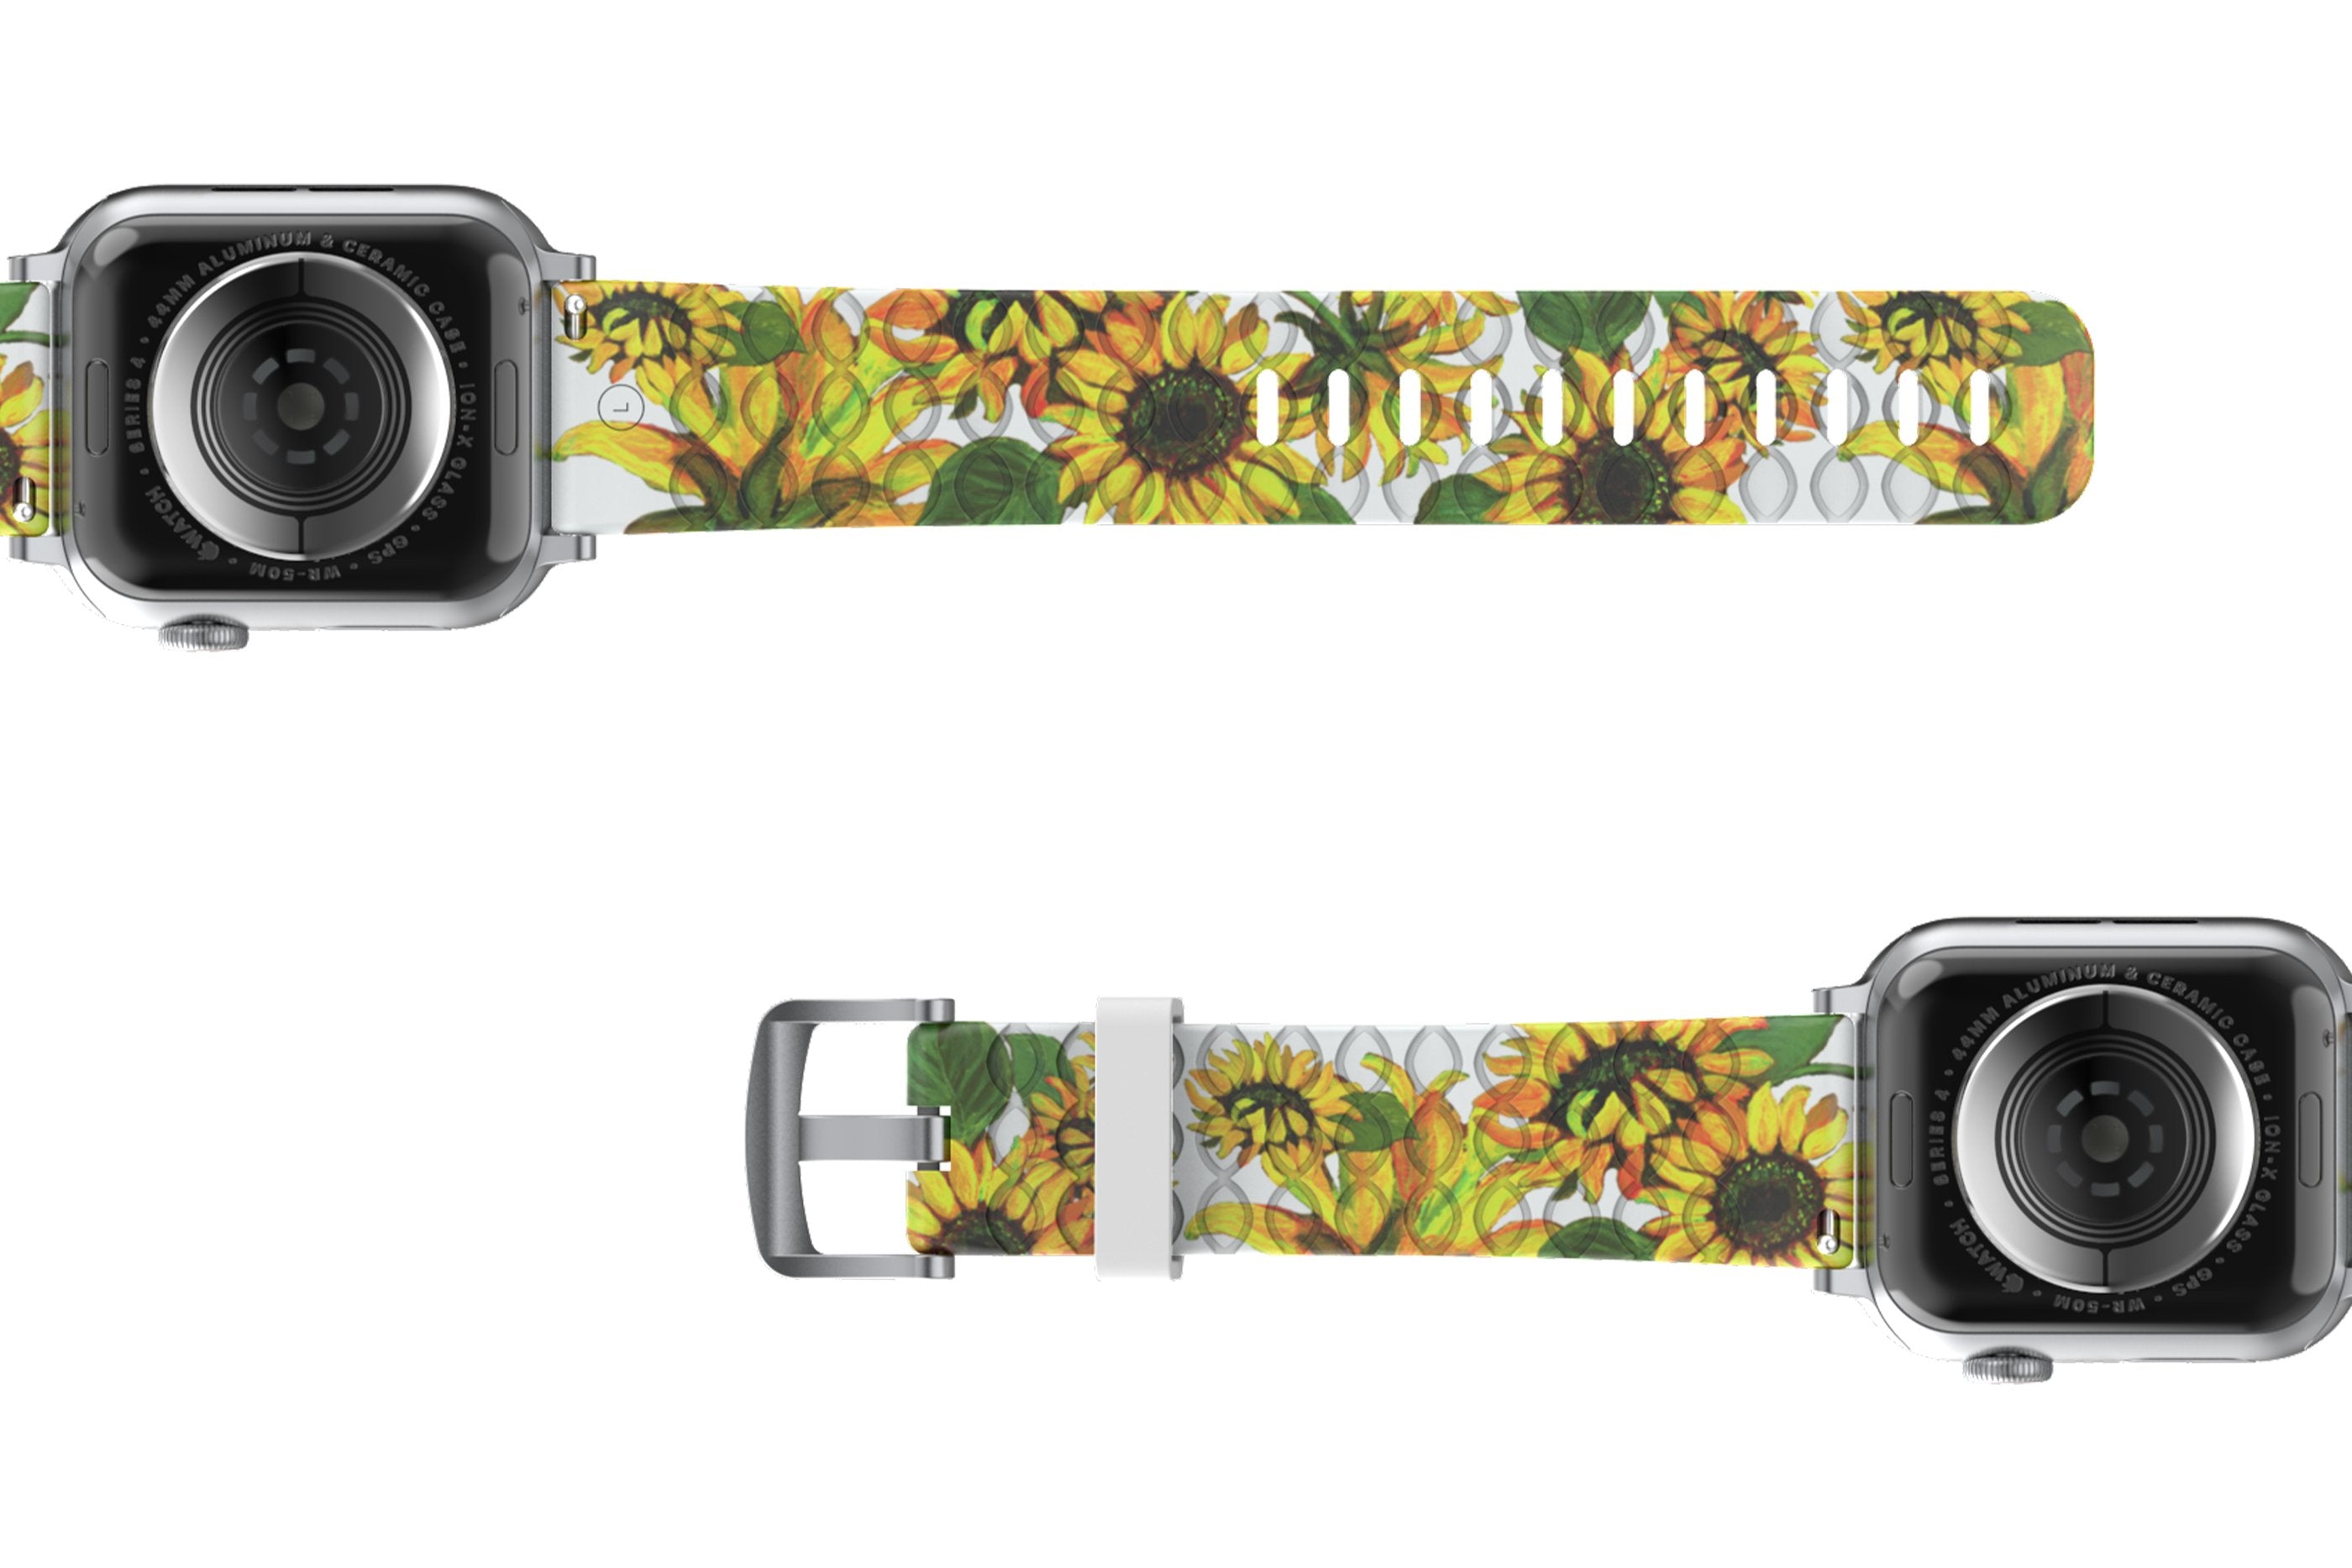 Sunflower Apple Watch Band with gray hardware viewed bottom up